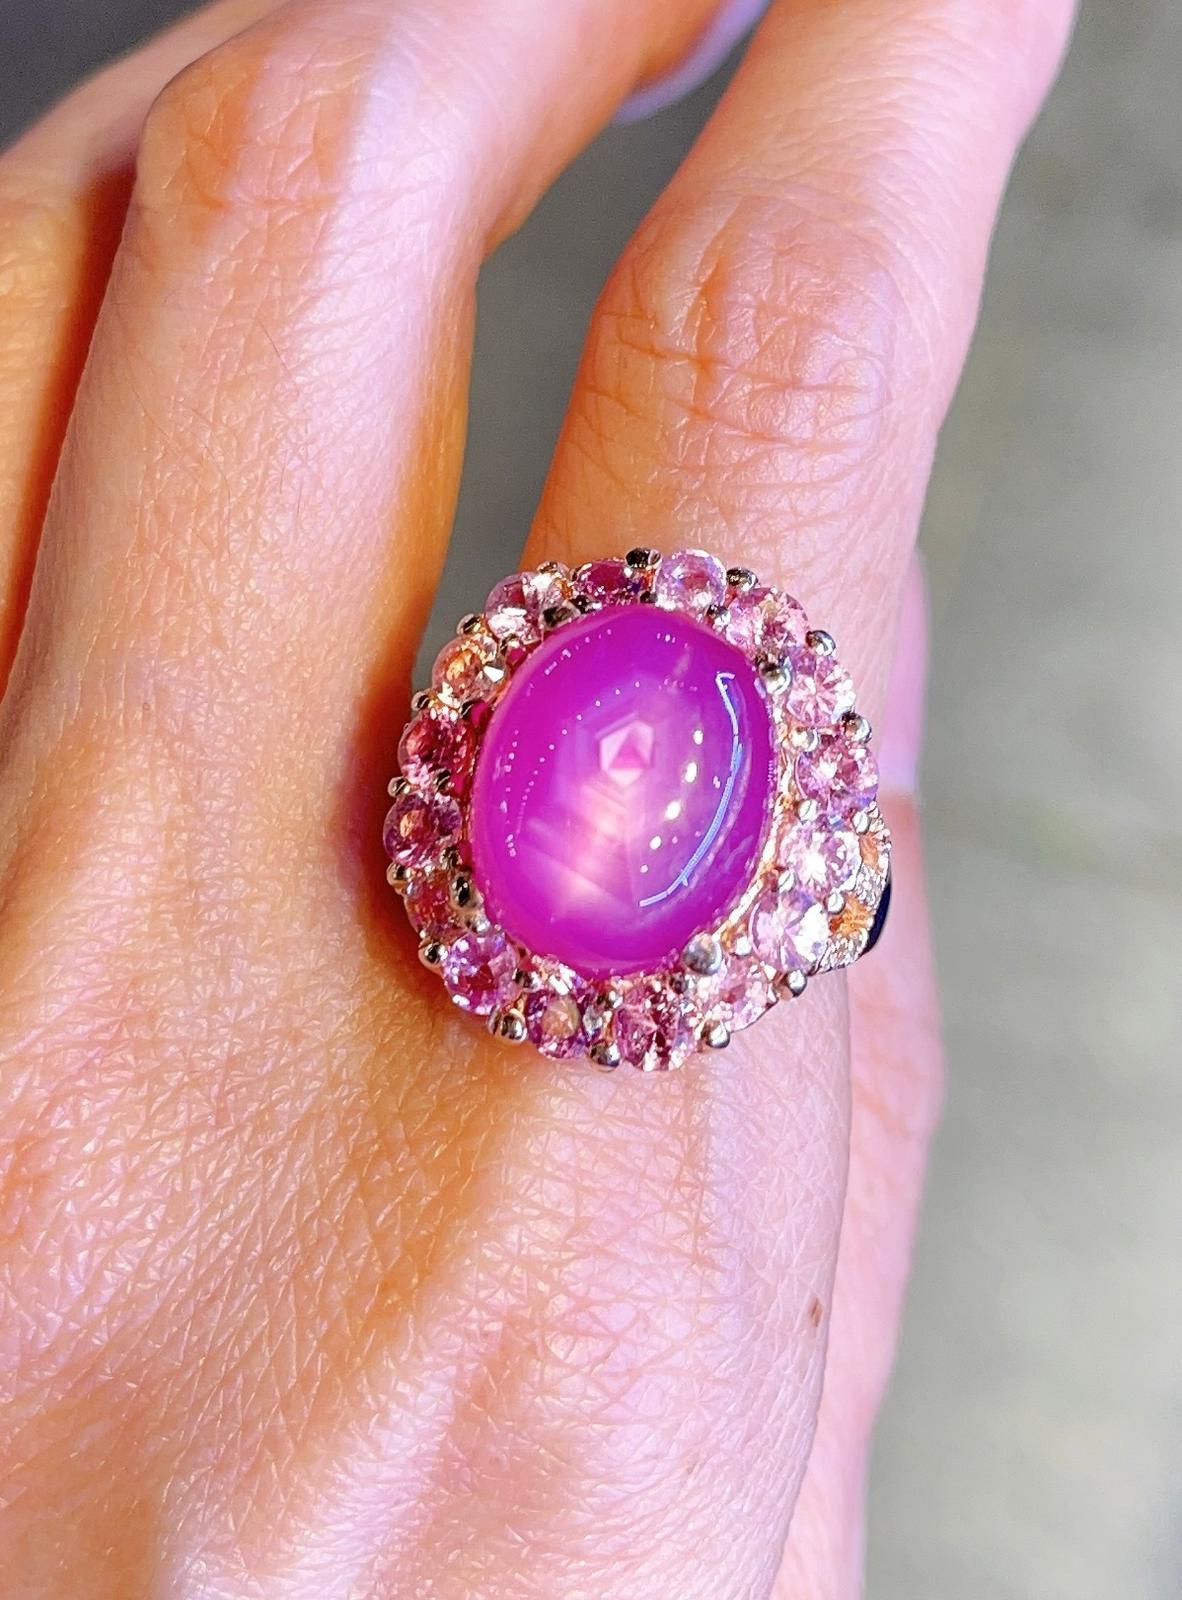 Belle Époque Bochic “Capri” Star Ruby Ring with Pink Sapphires set in 22K Gold & Silver